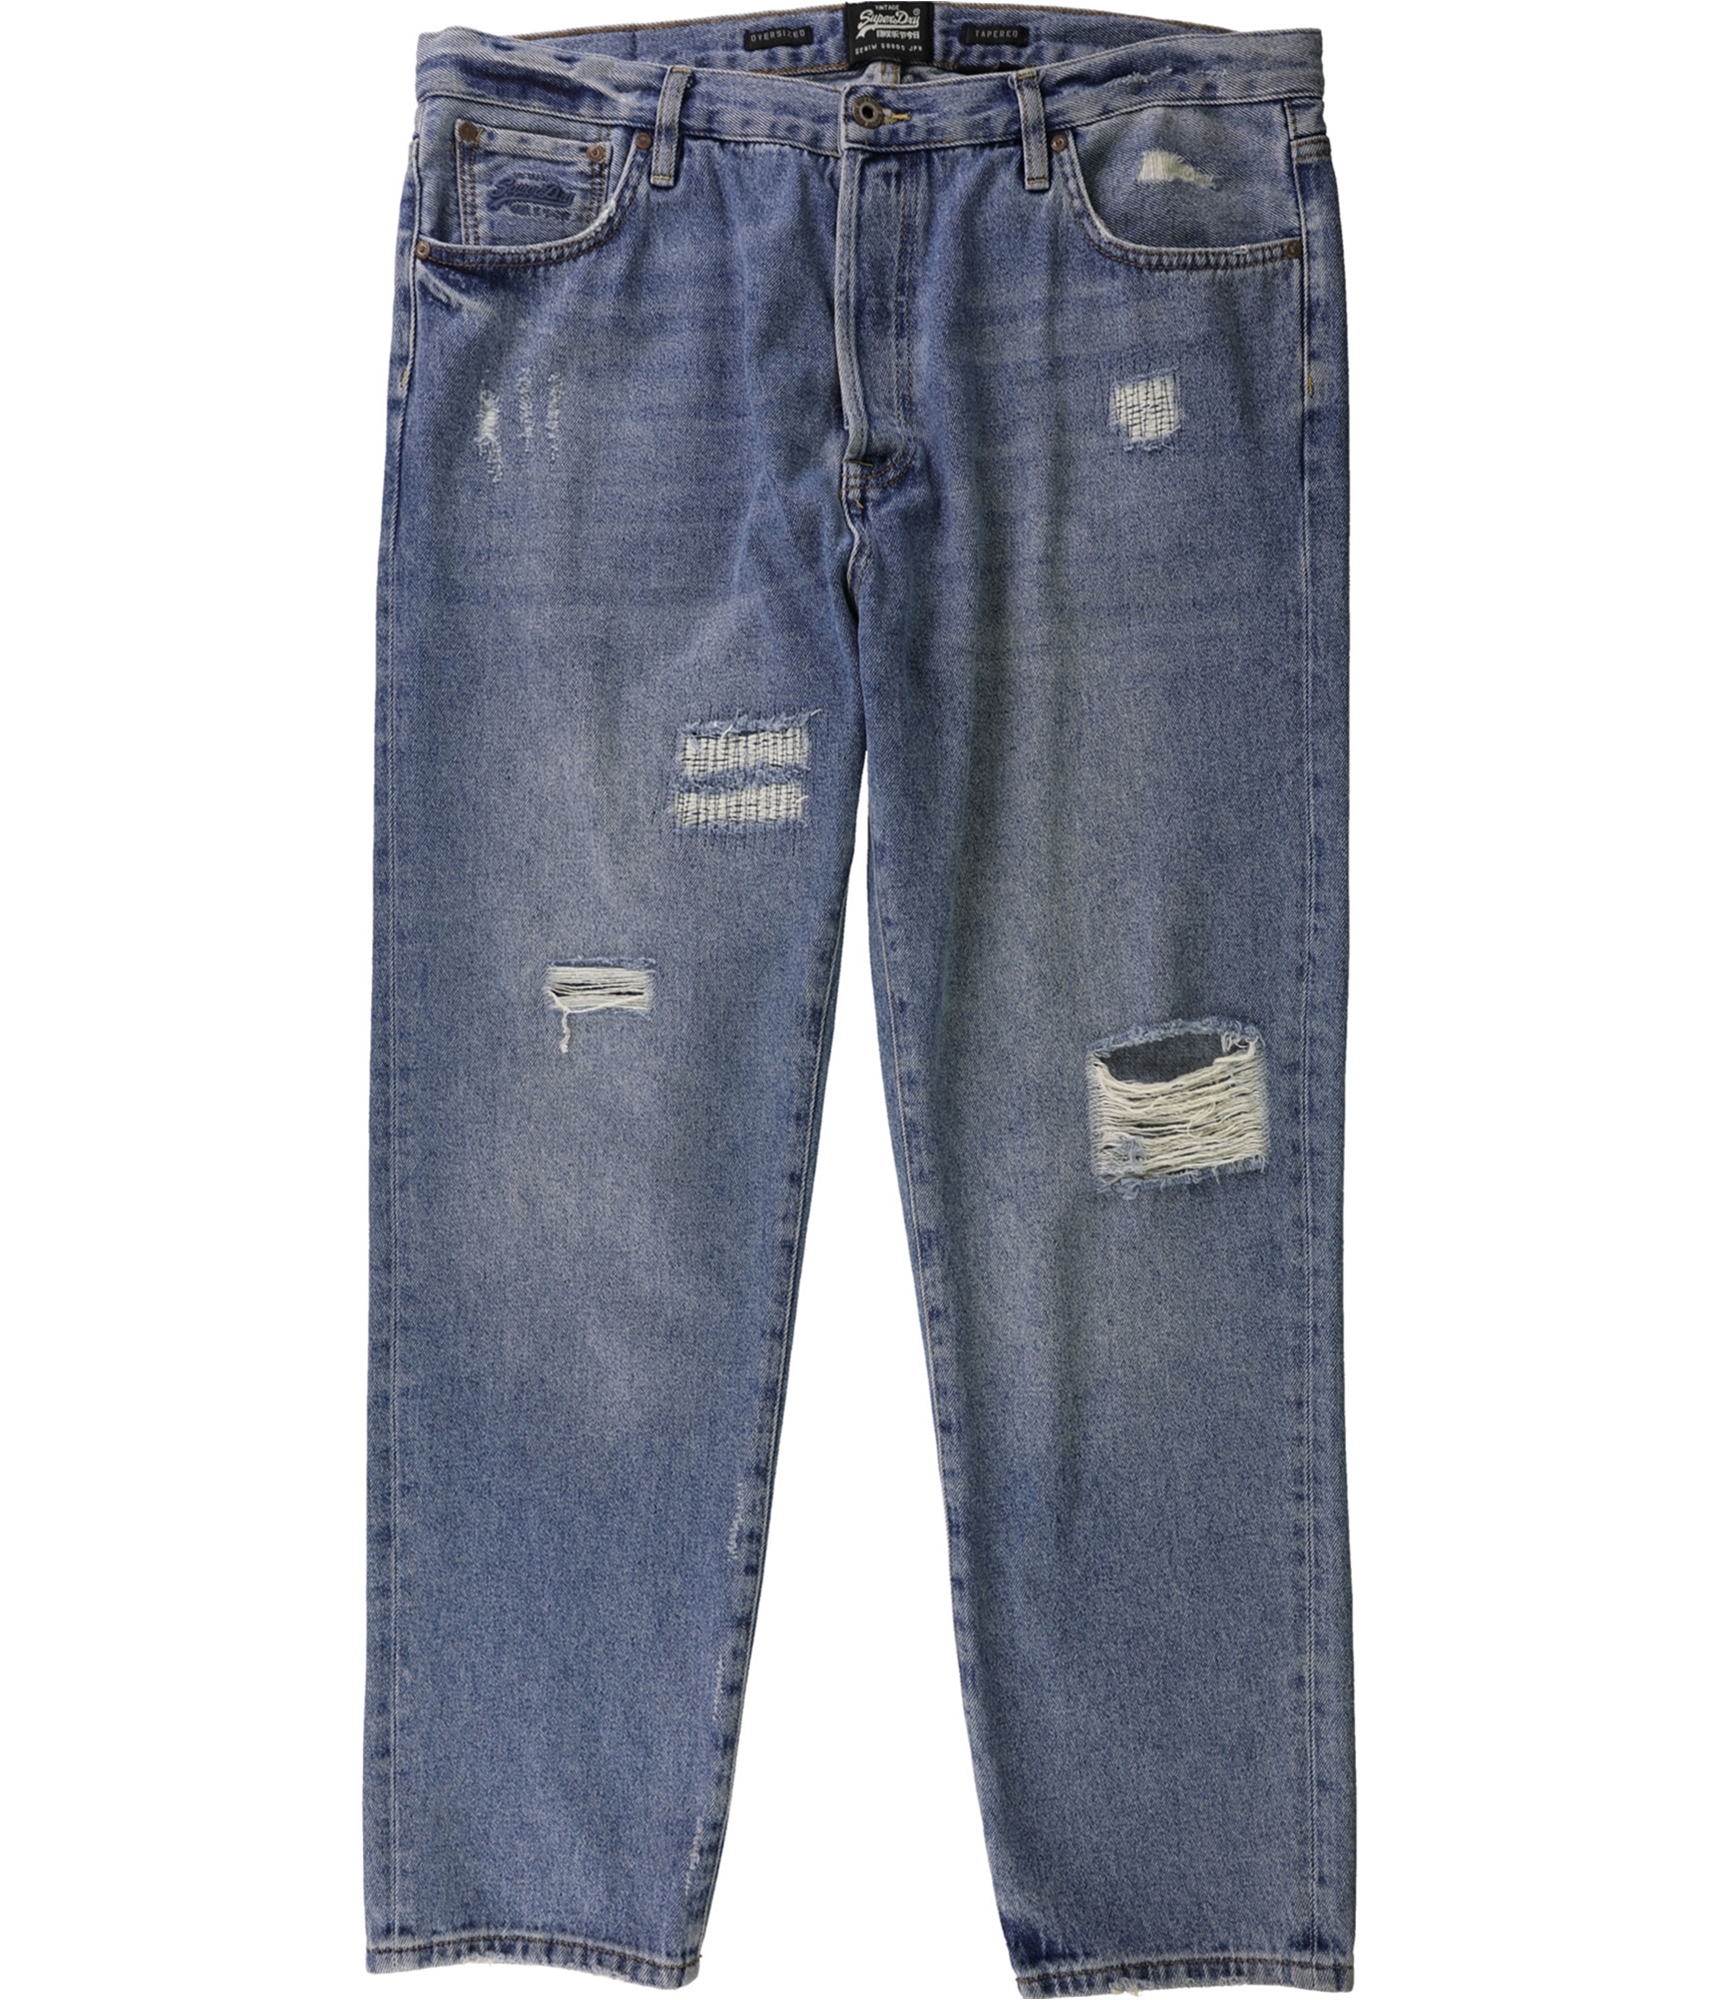 Buy a Superdry Tapered Slim Fit Jeans Online | TagsWeekly.com